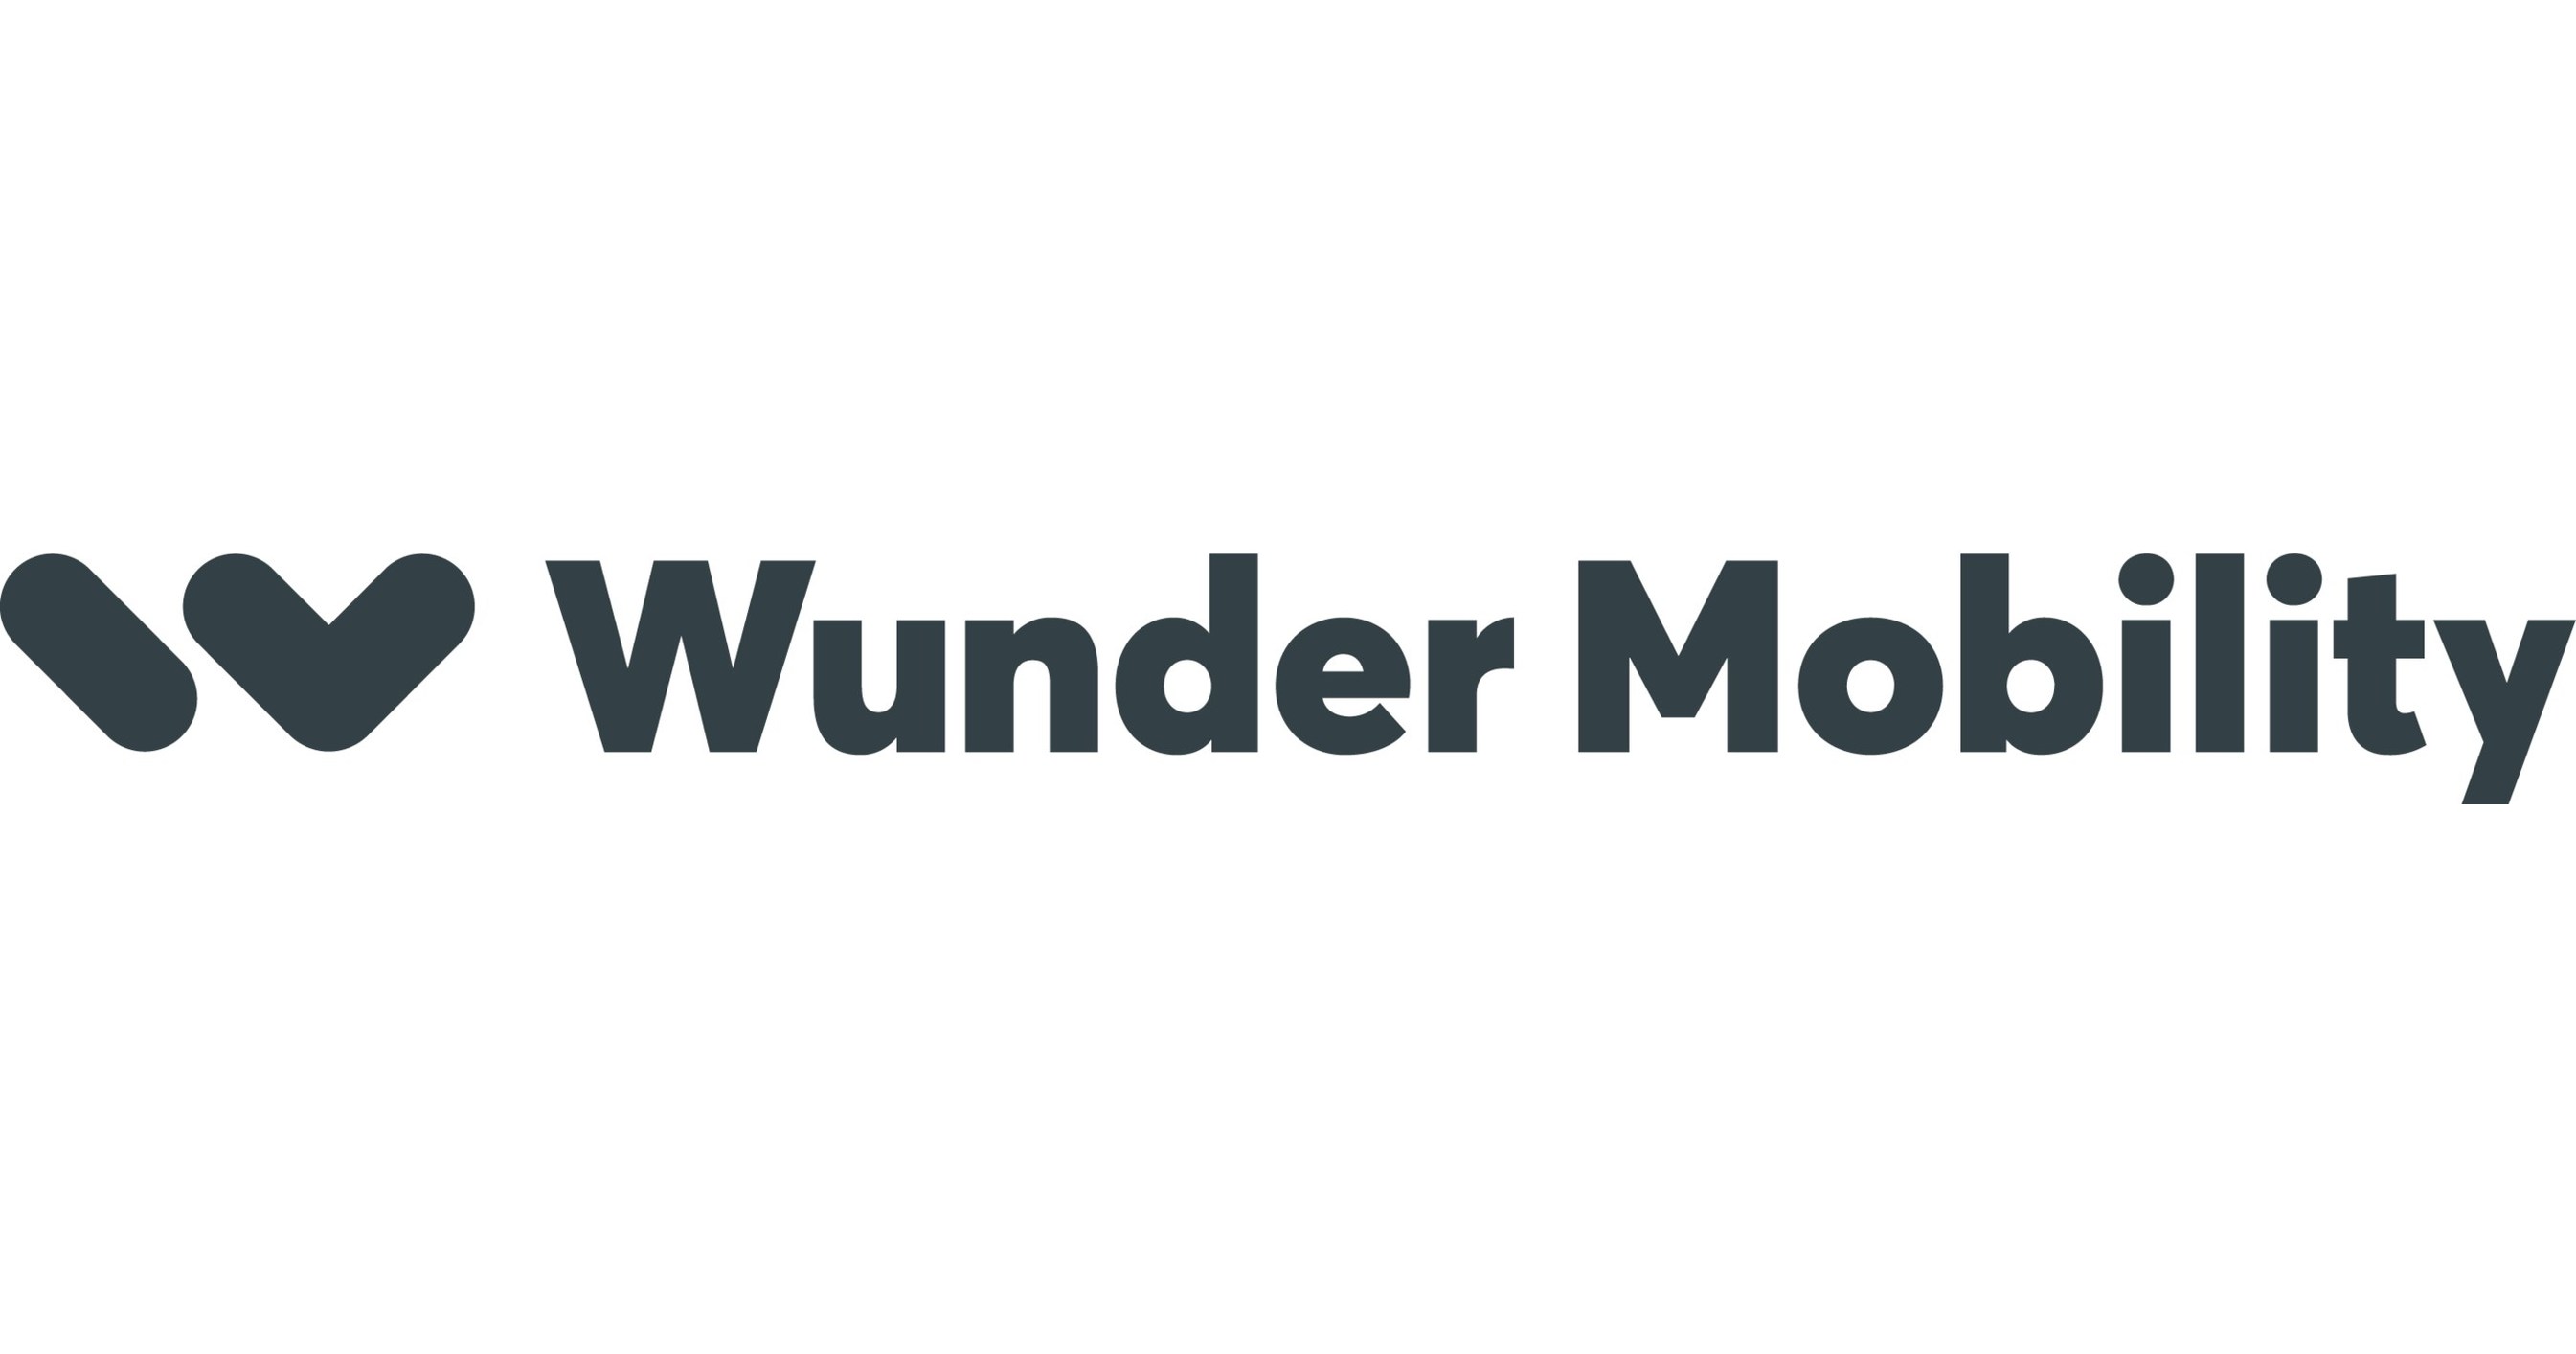 Wunder Mobility Announces U.S. Launch to Innovate, Build and Scale Mobility  Services for Companies, Municipalities and Fleet Operators